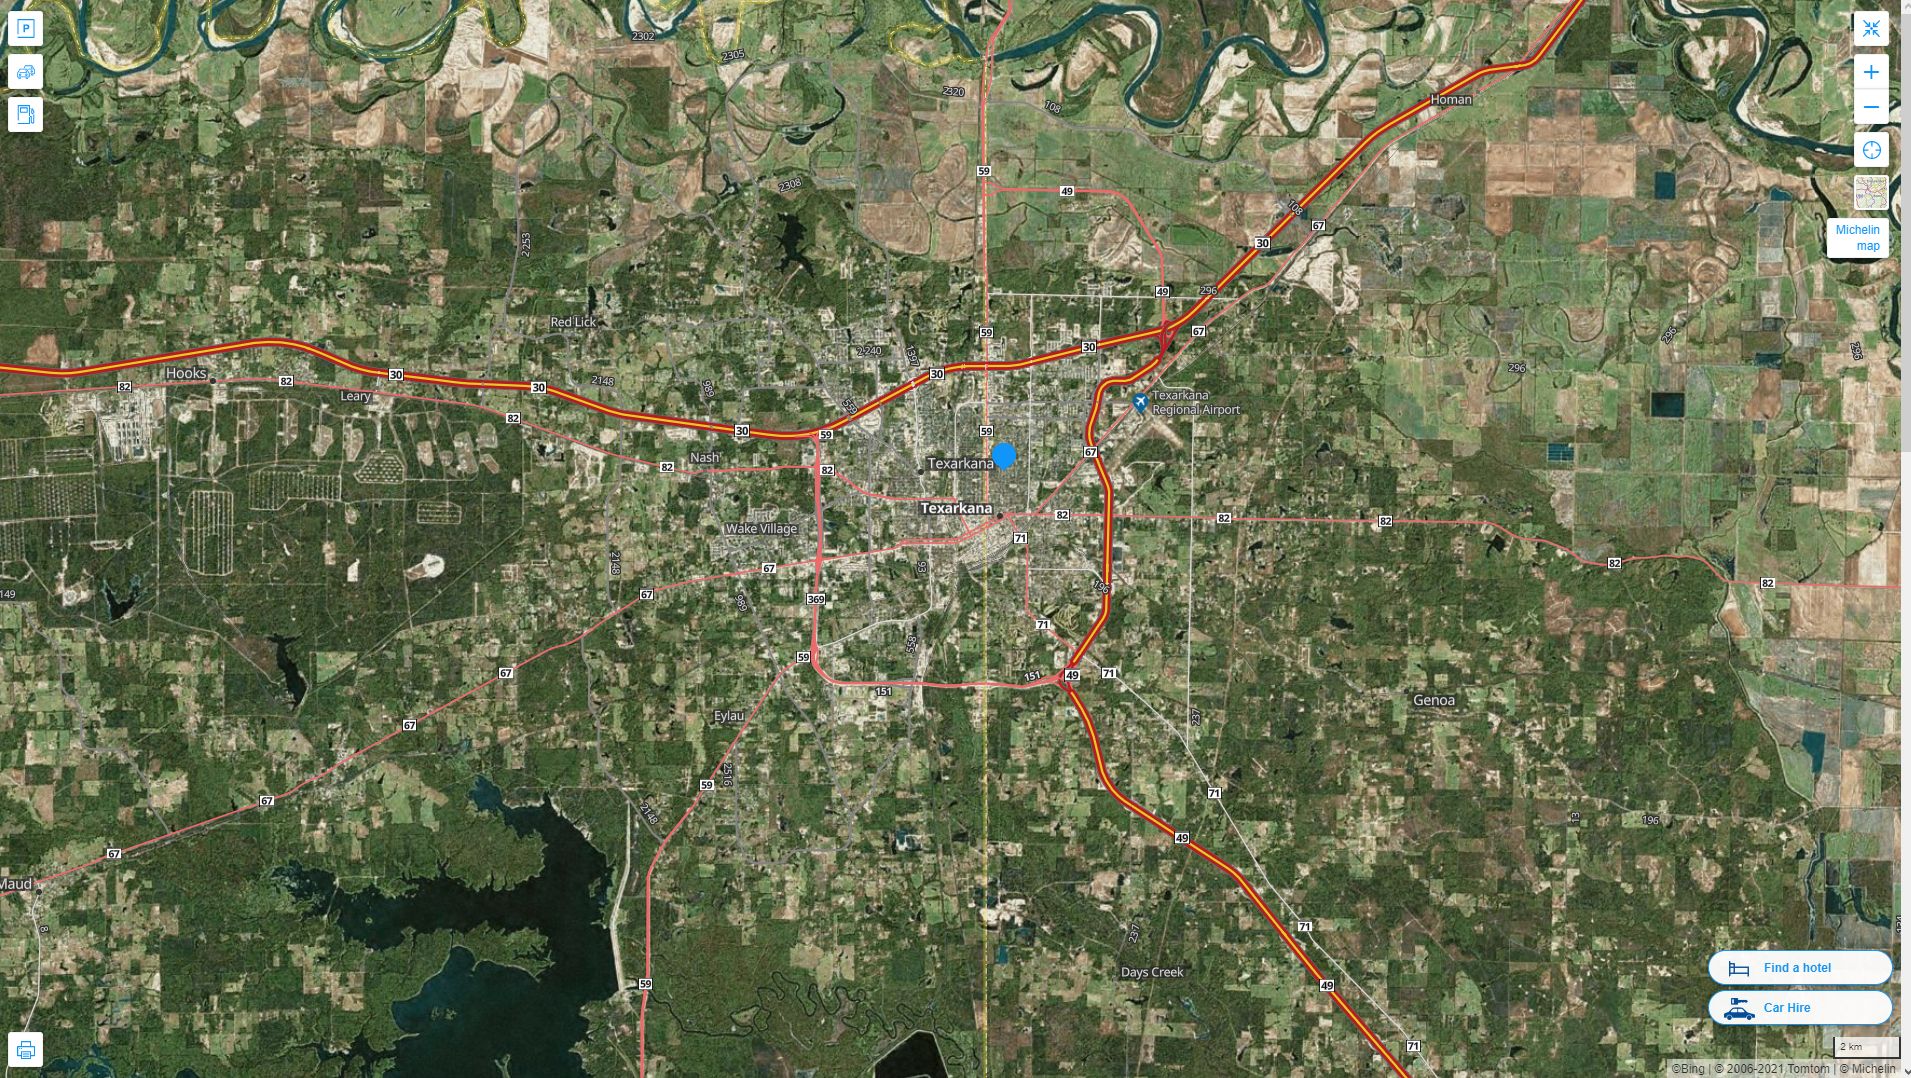 Texarkana Arkansas Highway and Road Map with Satellite View